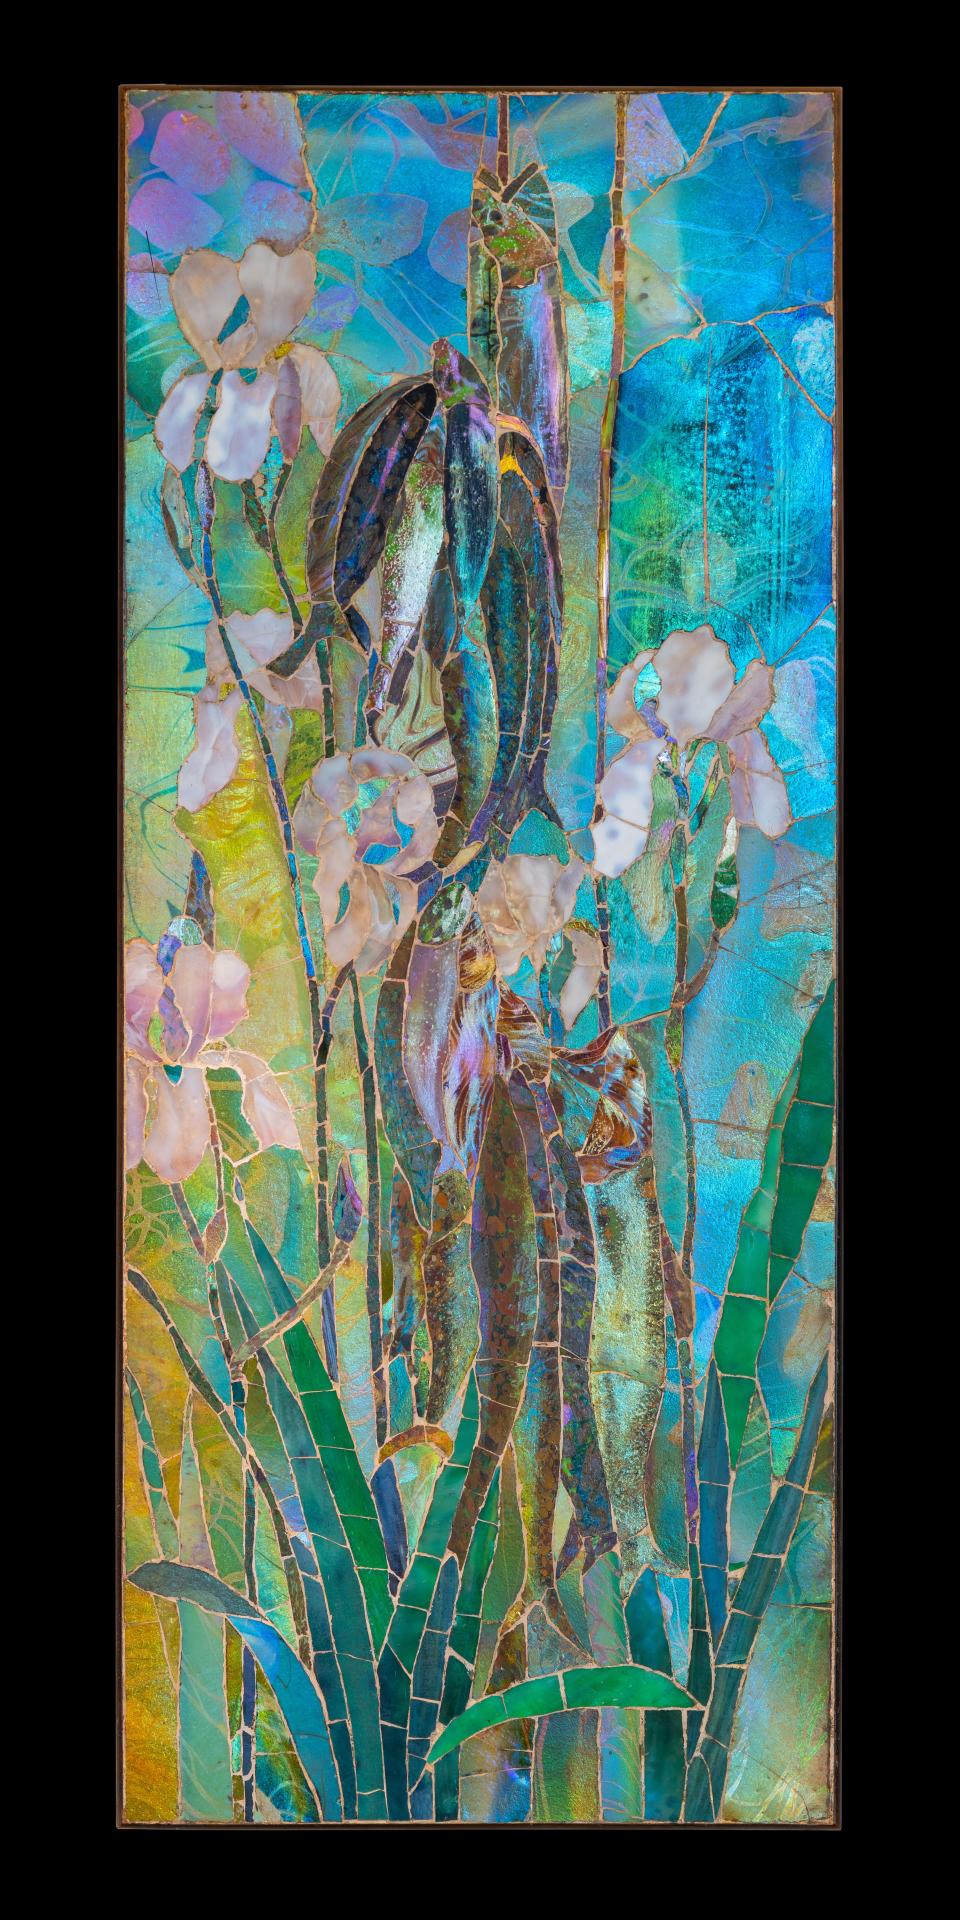 A fish and irises mosaic from the studio of Louis Comfort Tiffany will be on display at Selby Botanical Gardens during its 2023 exhibition of “Tiffany: The Pursuit of Beauty in Nature.”